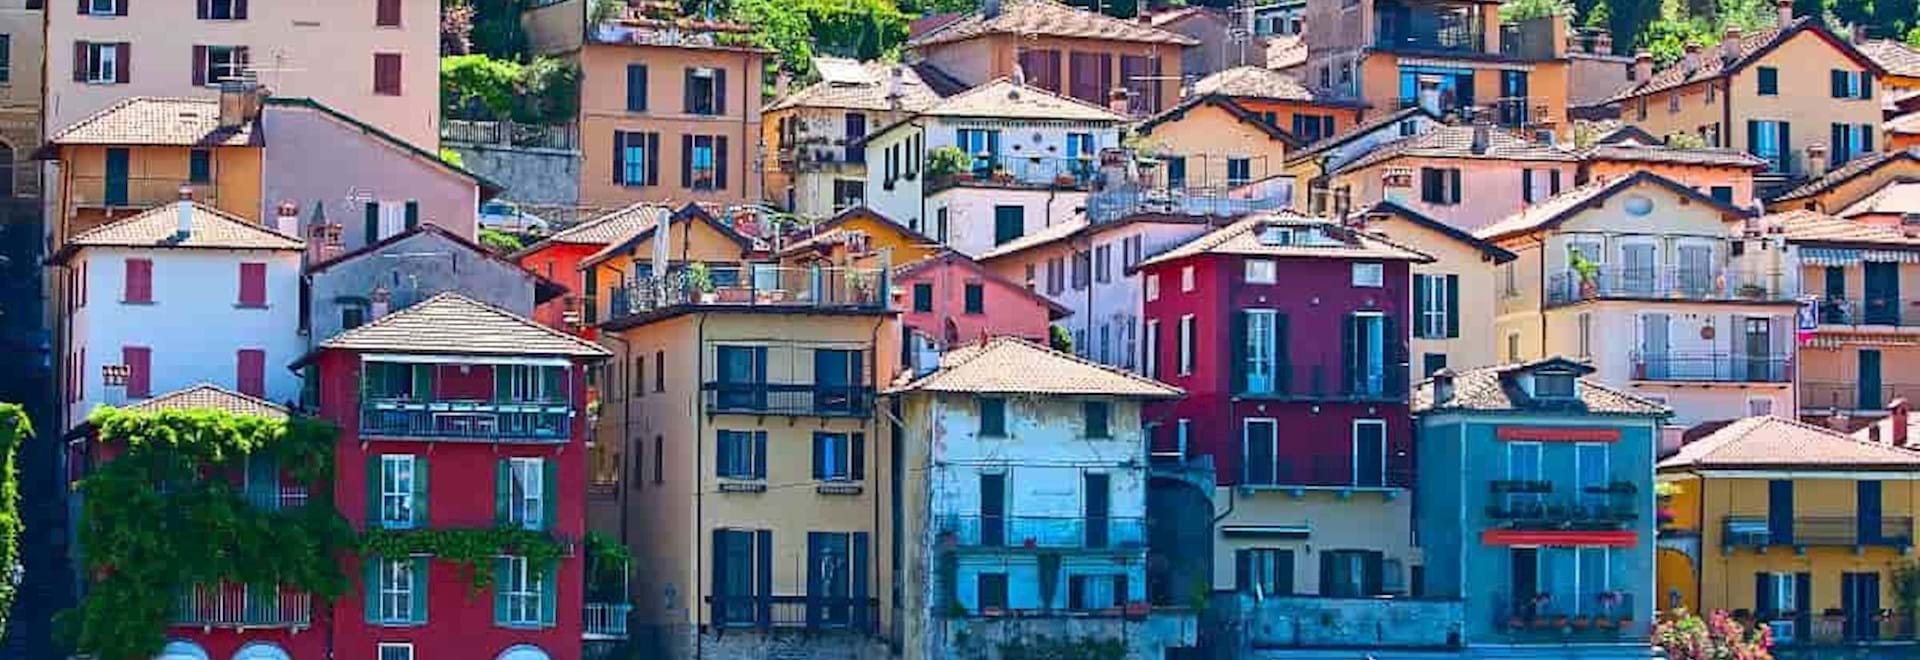 Colourful houses in Bellagio